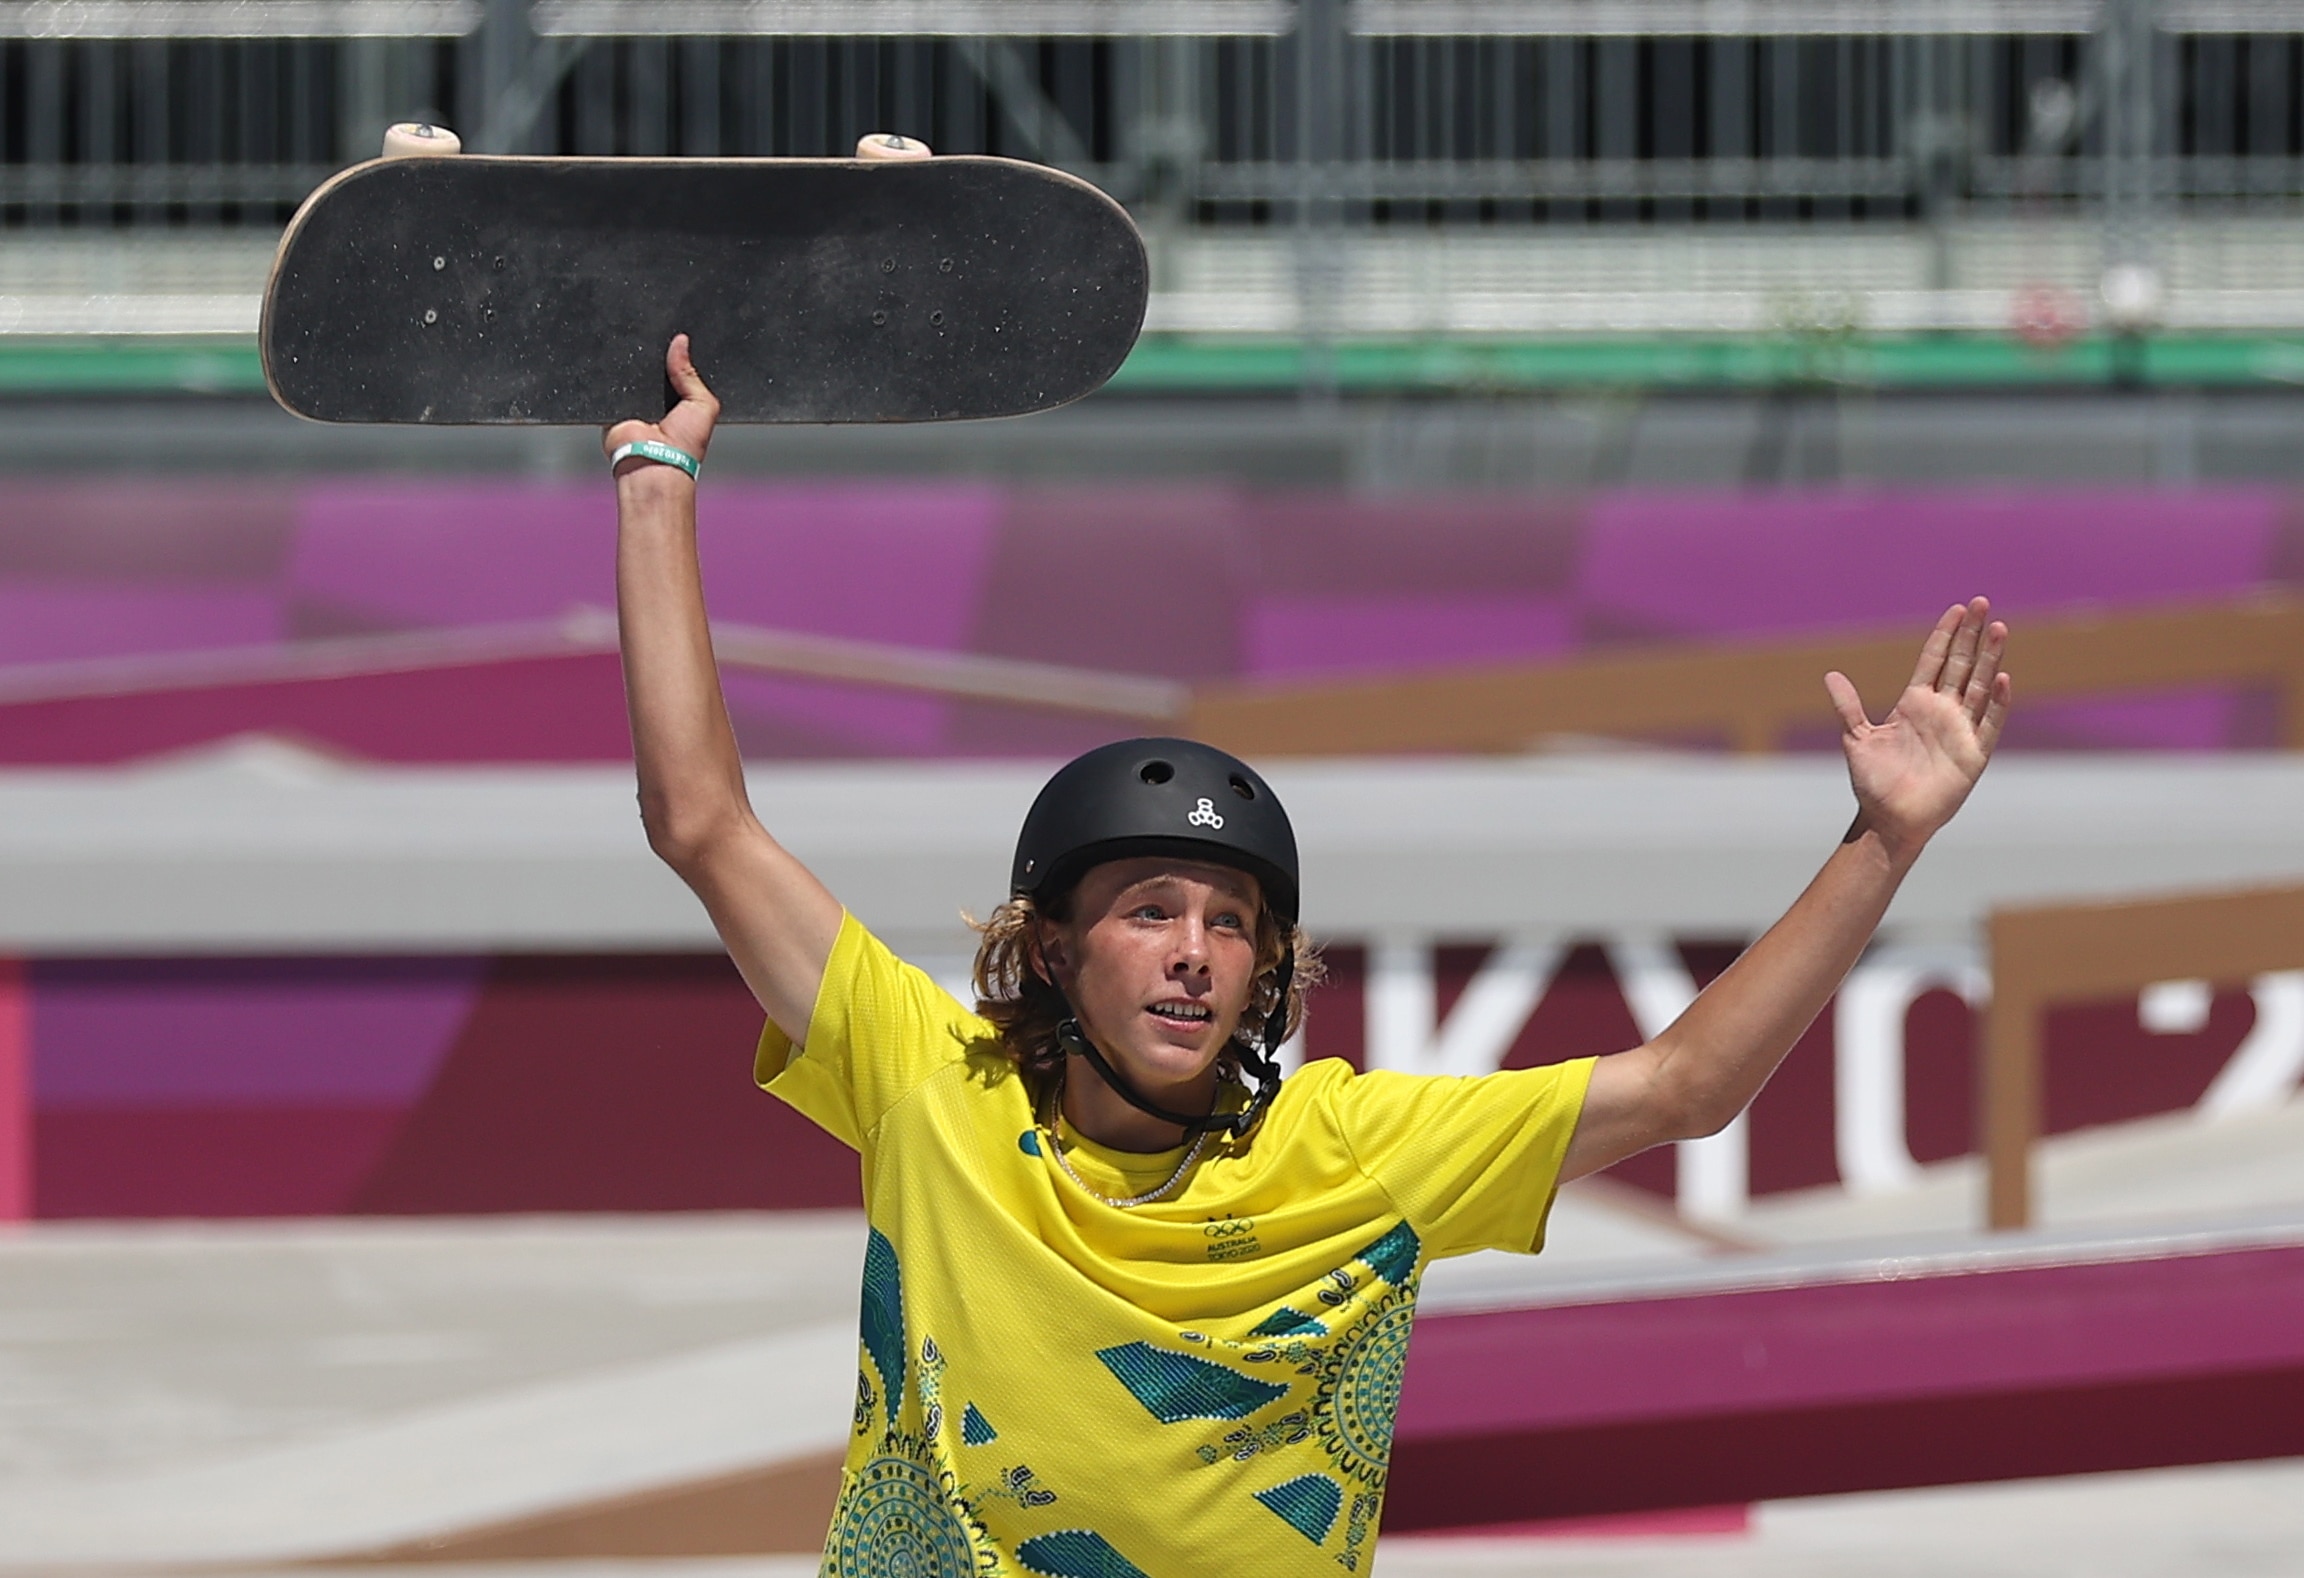 Keegan Palmer of Australia reacts after winning the Men's Park Skateboarding Finals at the Tokyo 2020 Olympic Games.